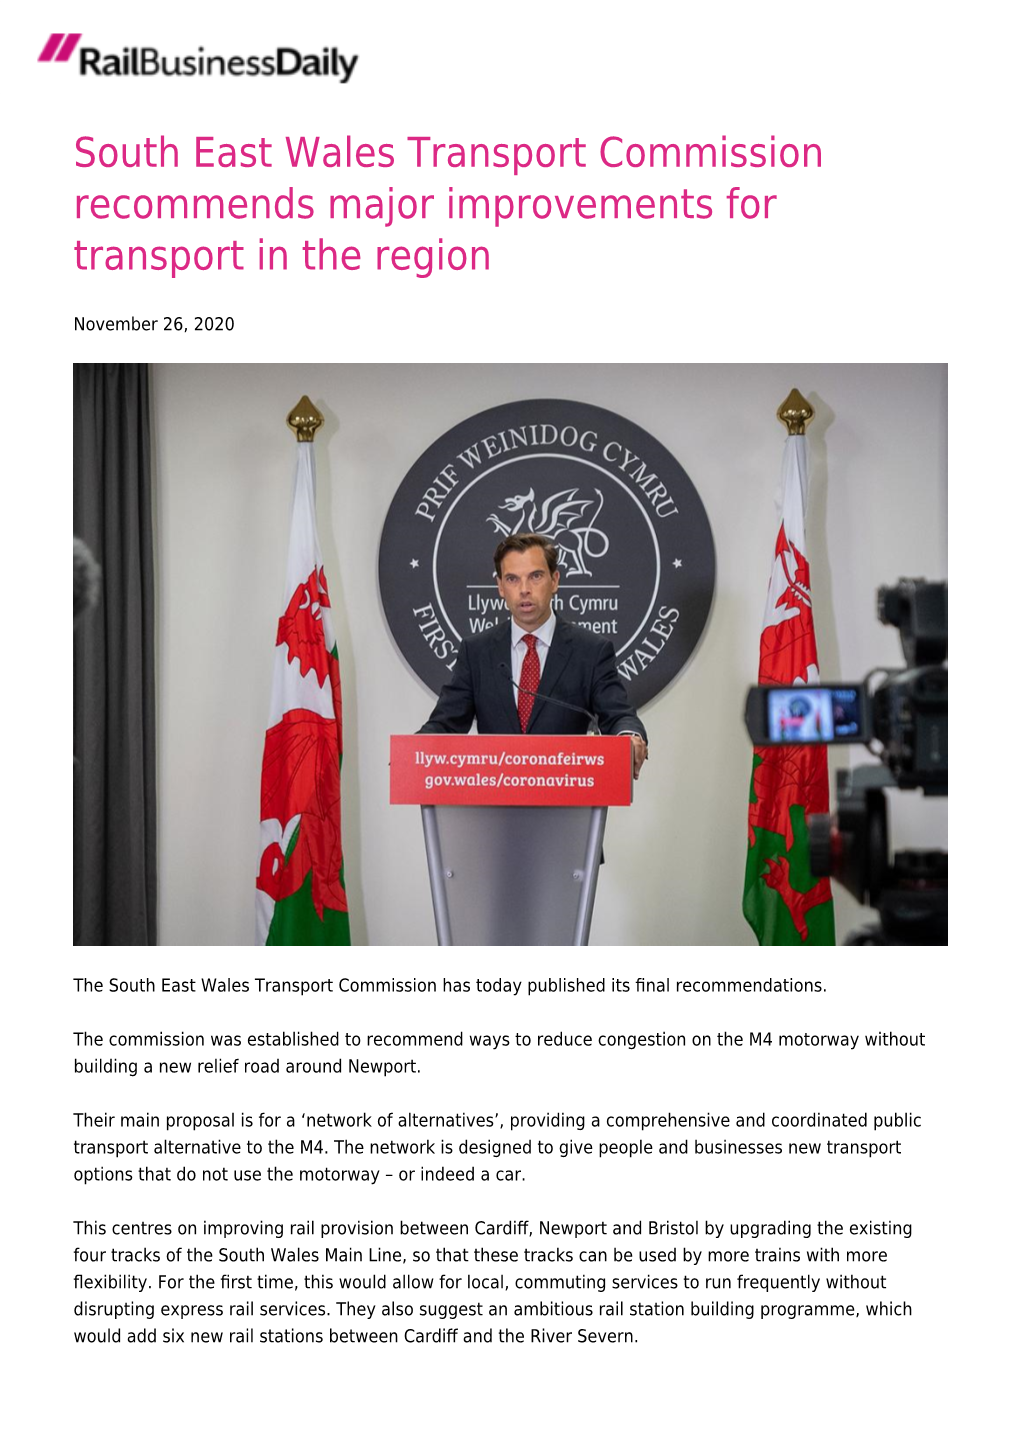 South East Wales Transport Commission Recommends Major Improvements for Transport in the Region